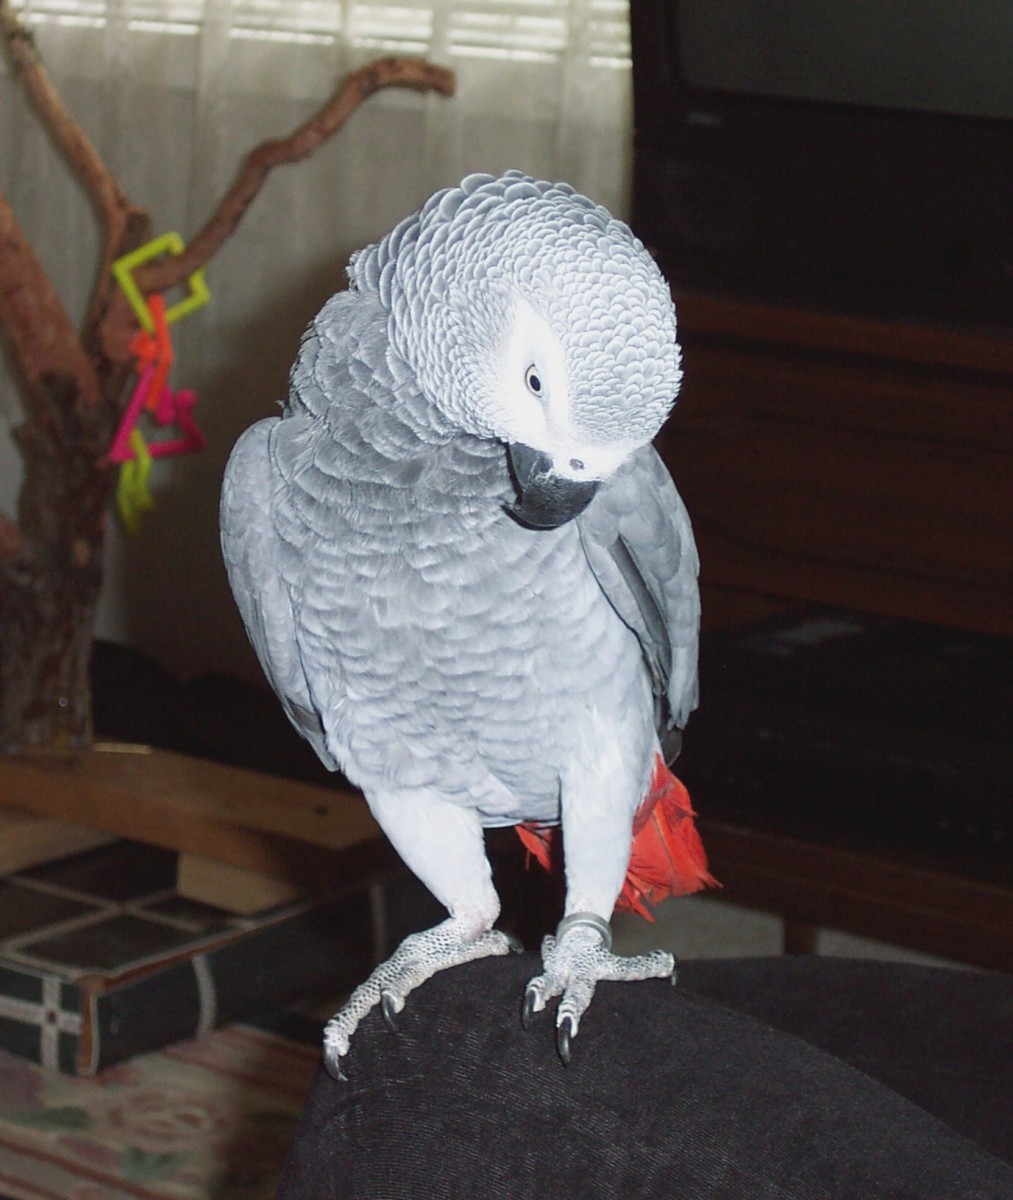 This is our boisterous parrot, Bailey, sitting on my knee.